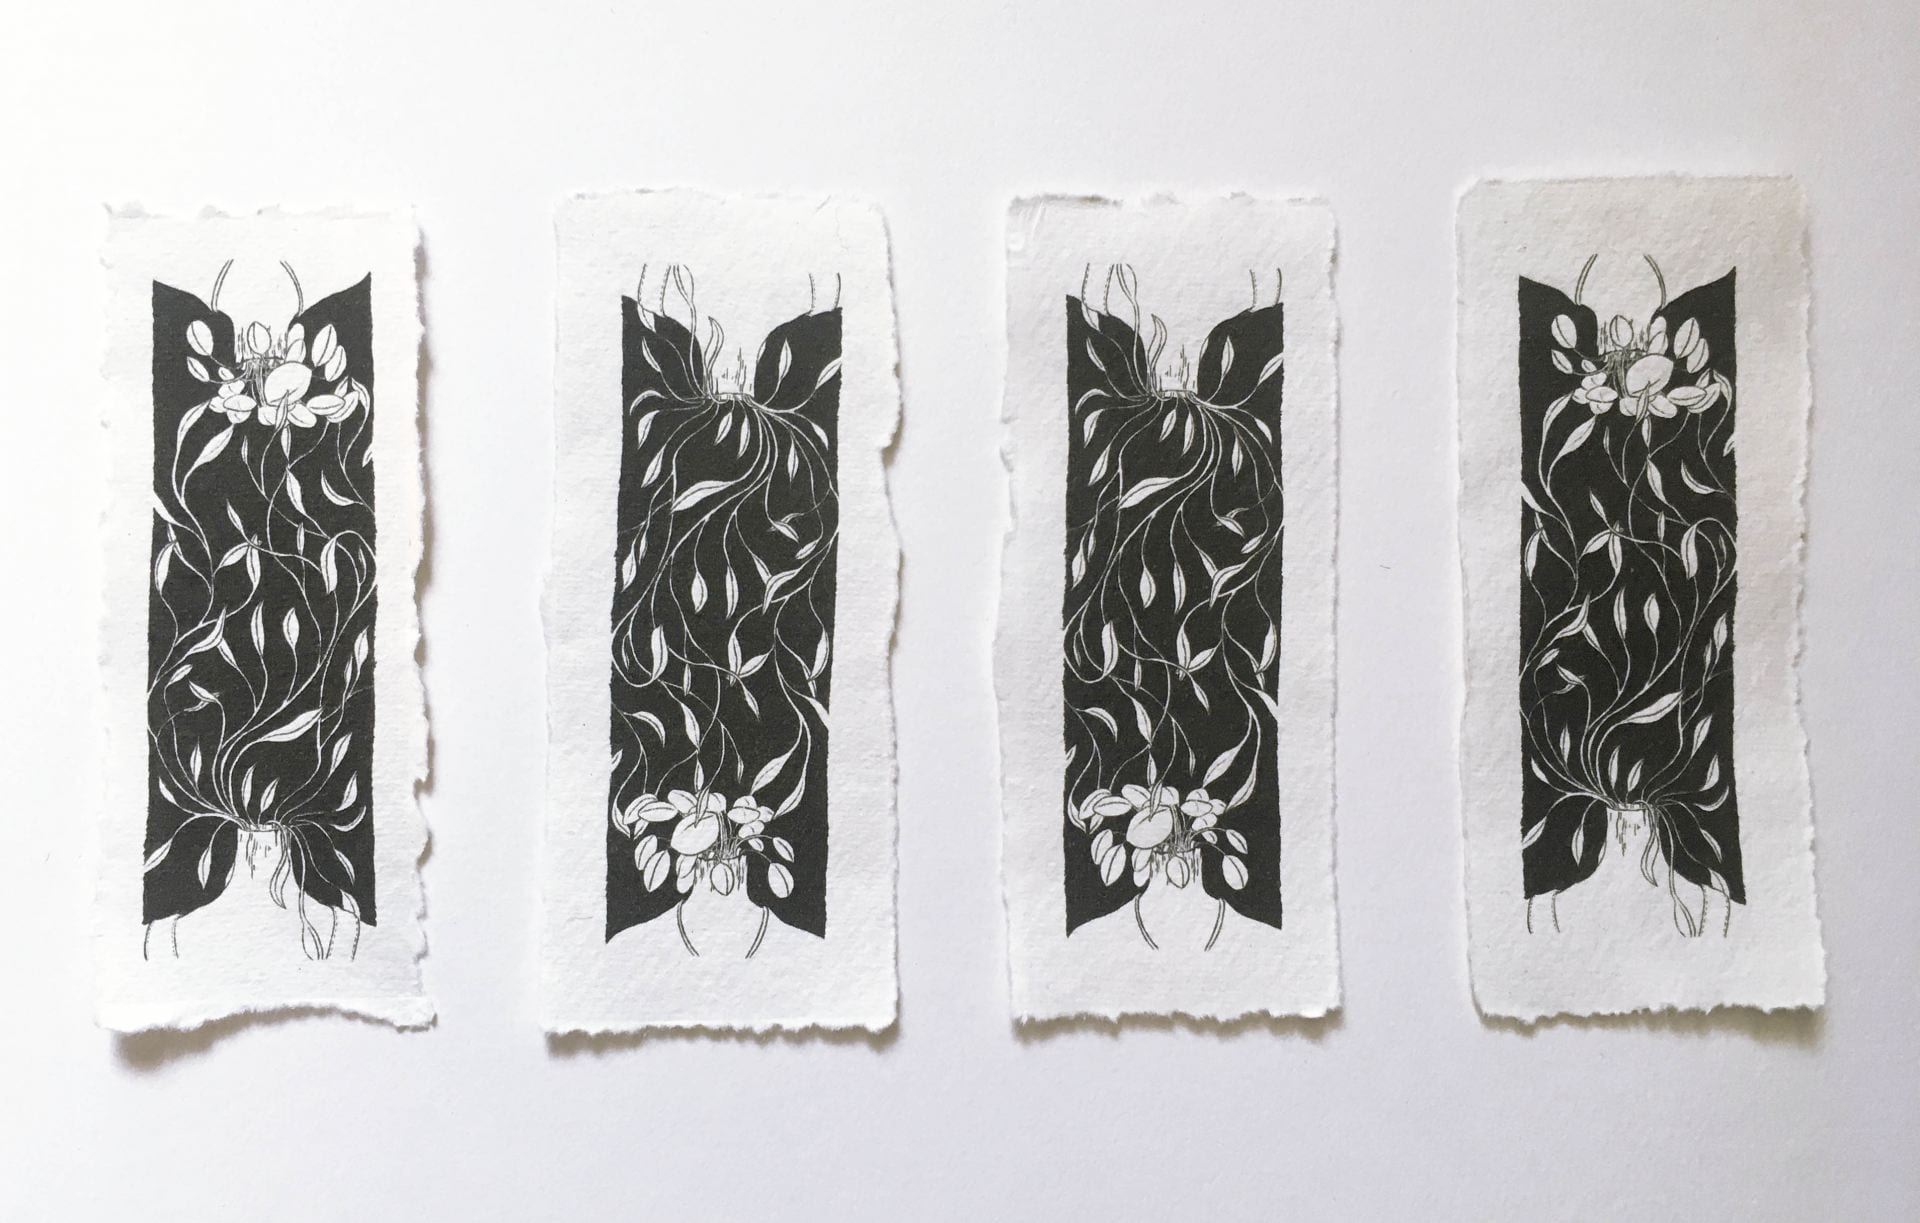 Image of bookmarks created to sell on my online store.